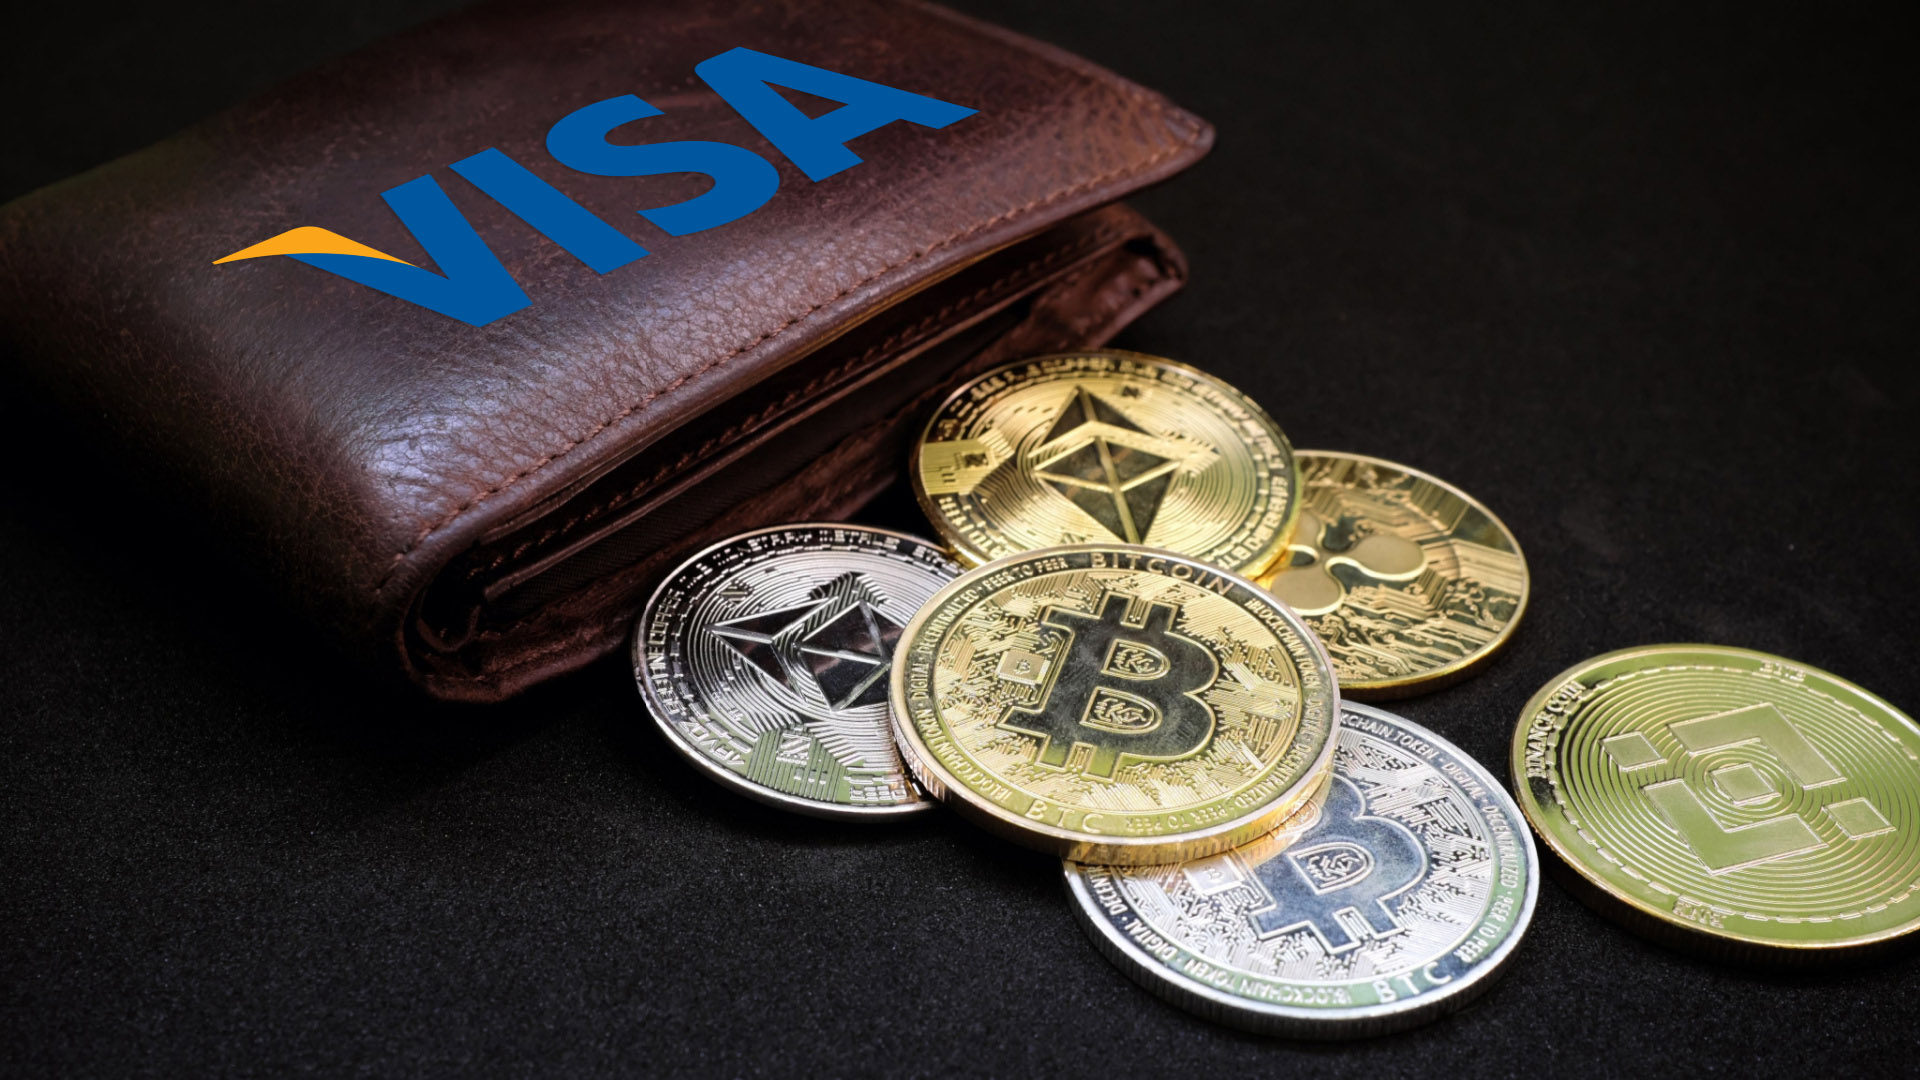 Visa – Next launch of a cryptocurrency wallet?